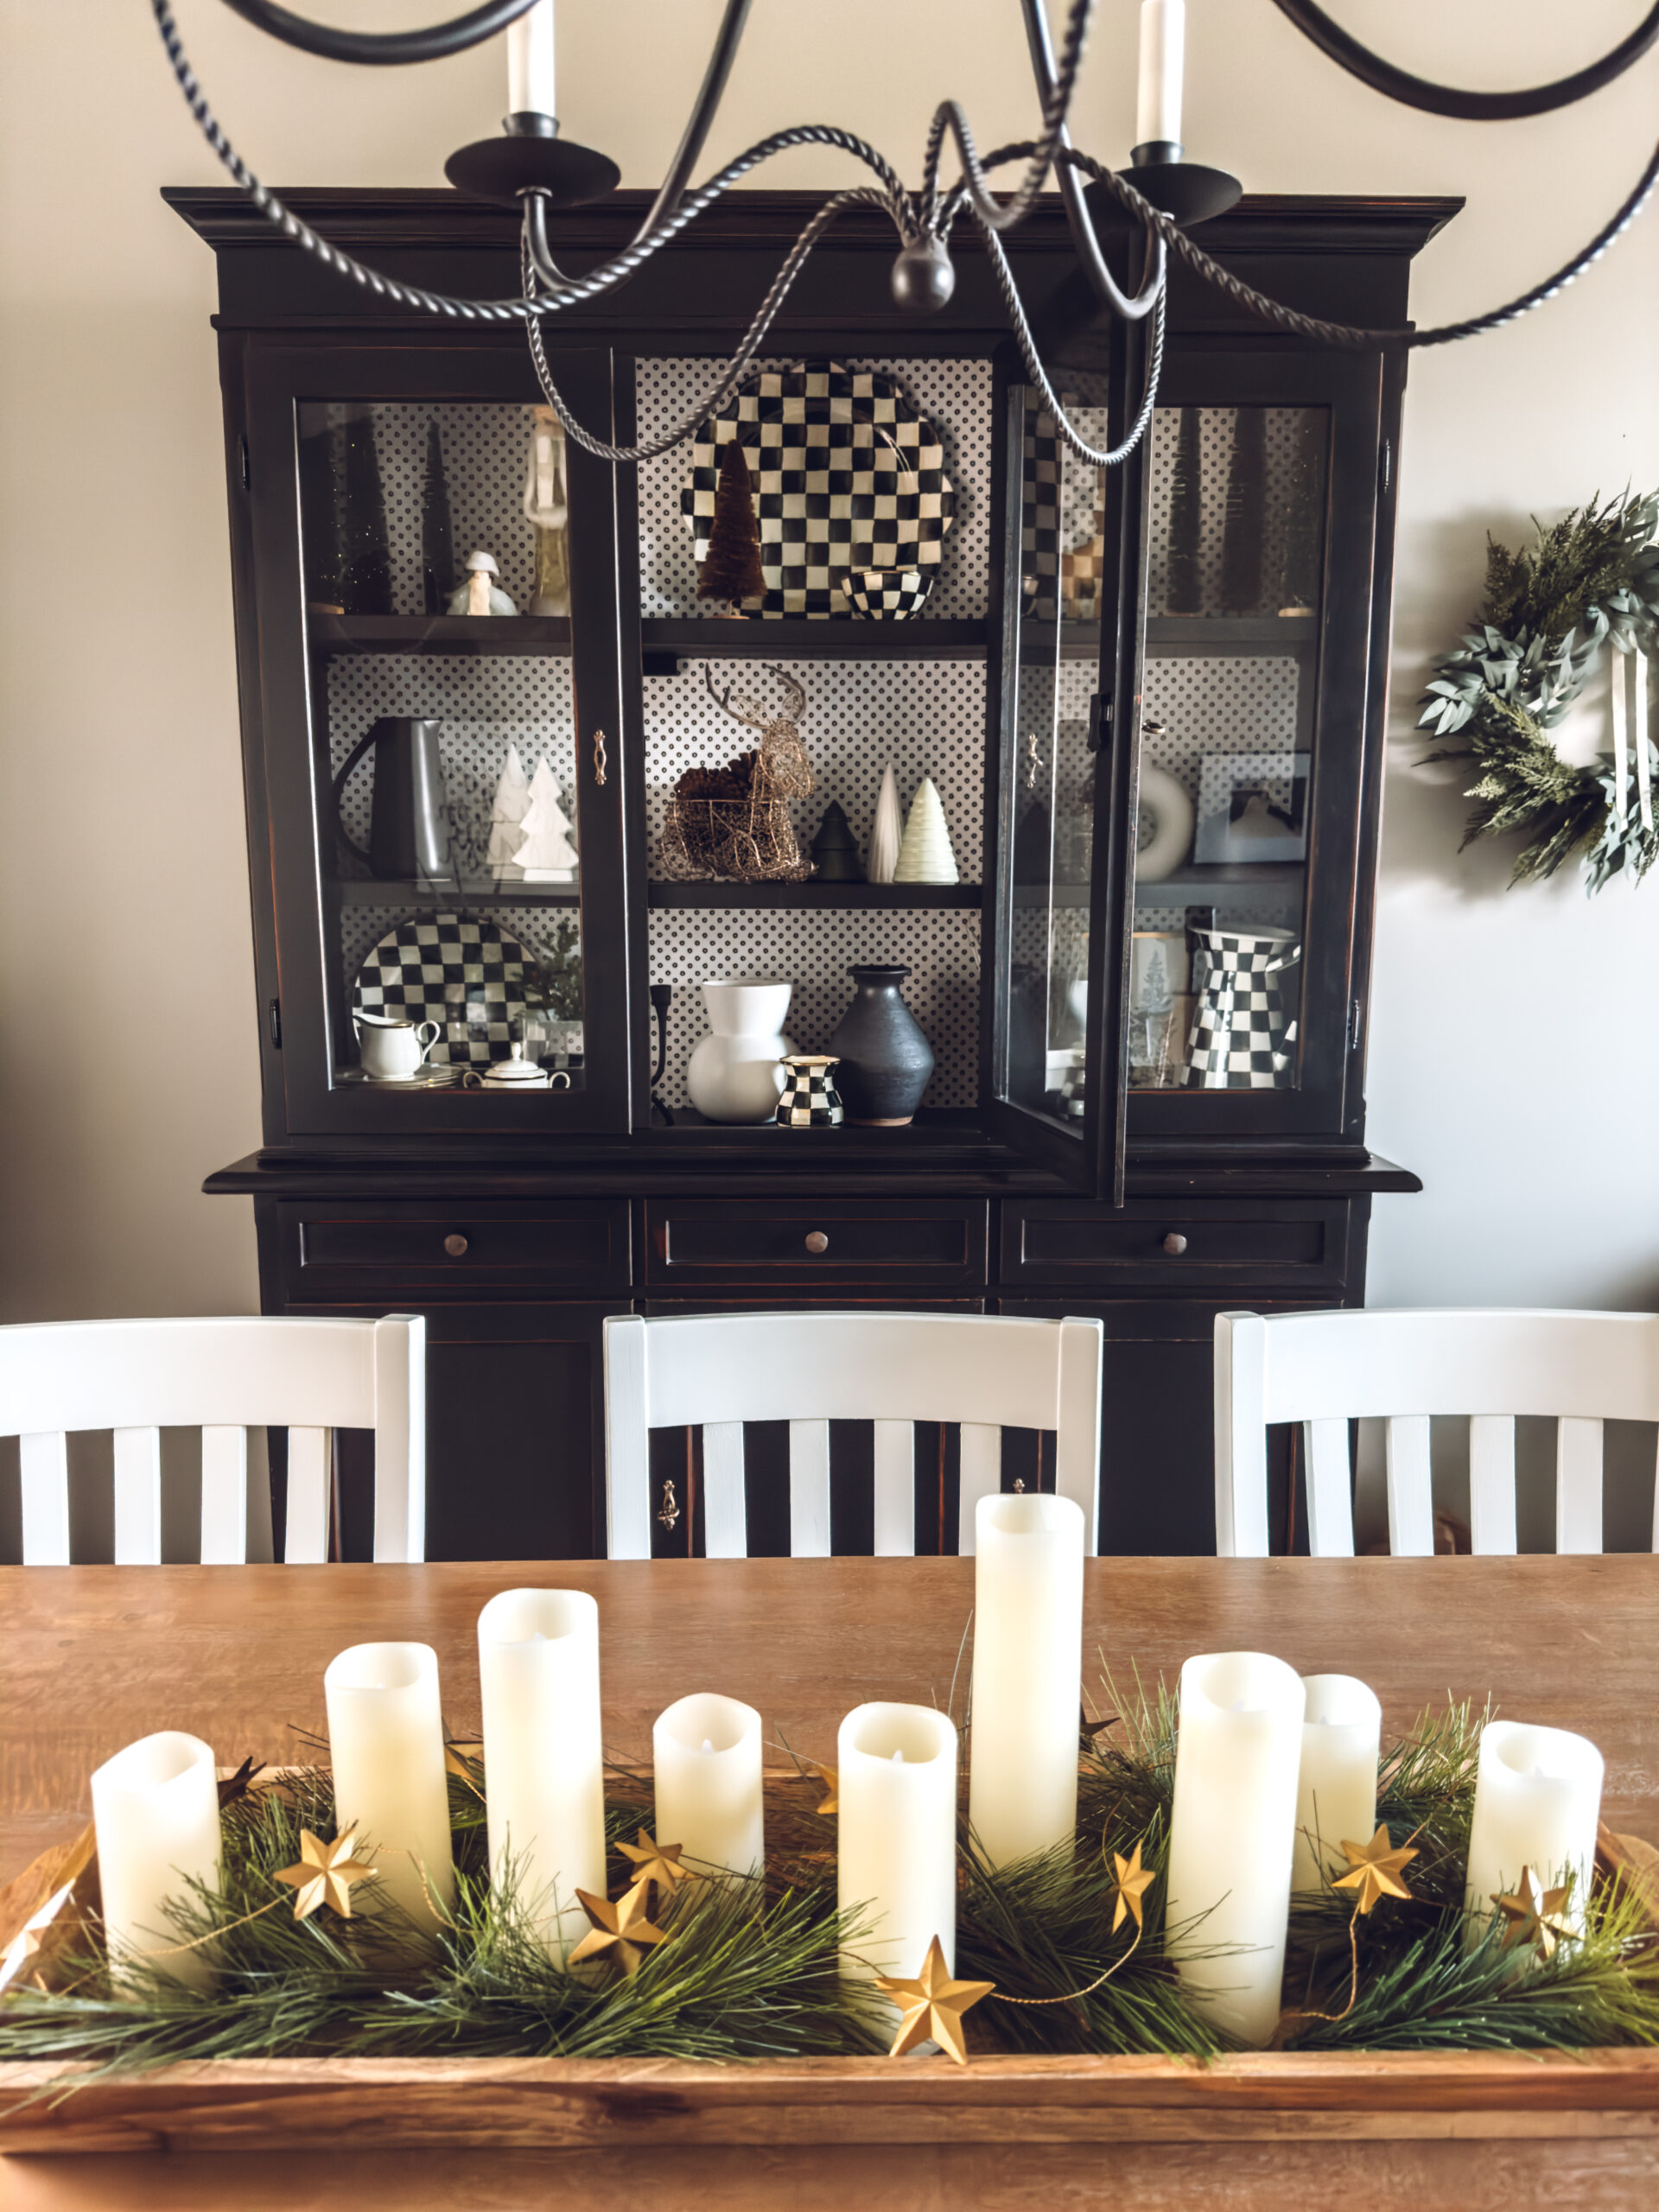 Using flameless candles to style a tray for Christmas